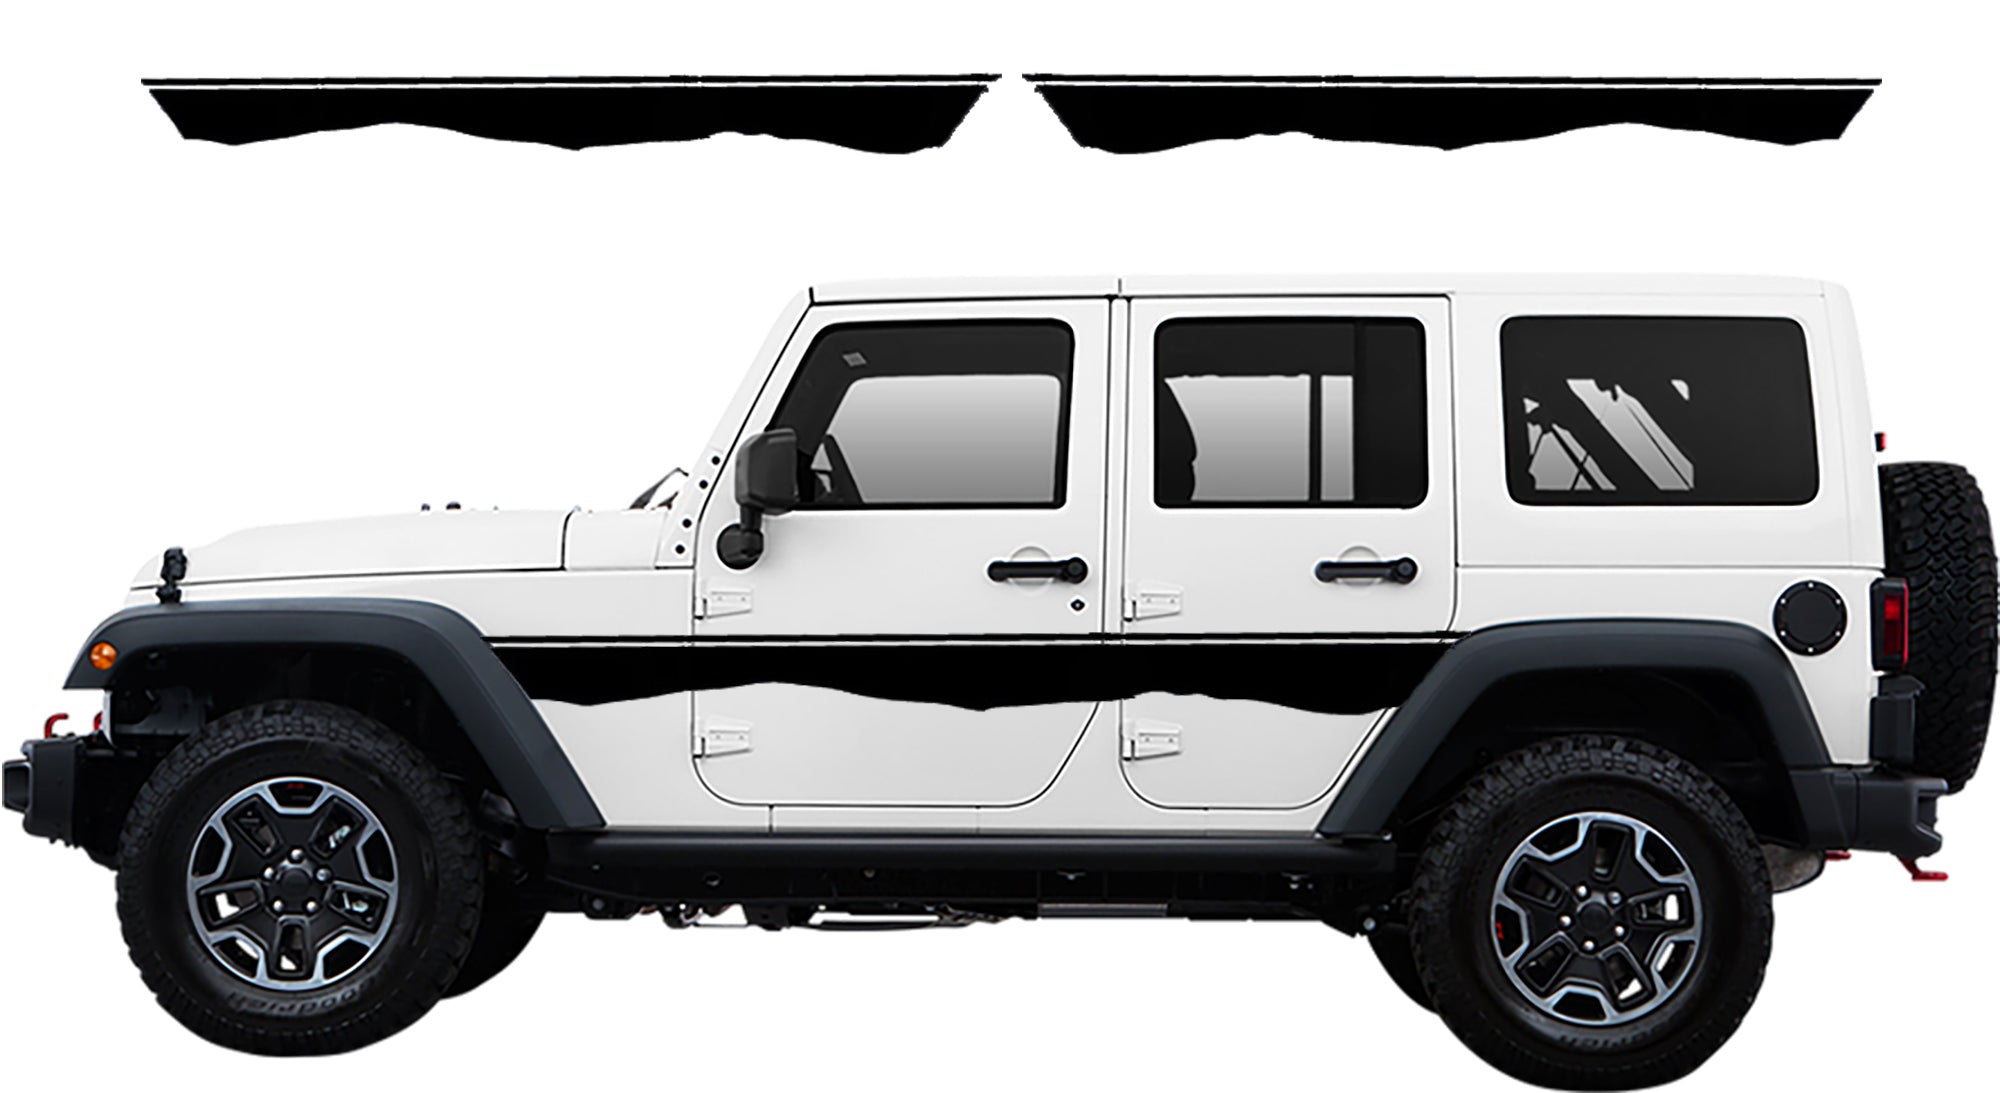 Mountain line decals for jeep wrangler jk 2007 to 2018 models